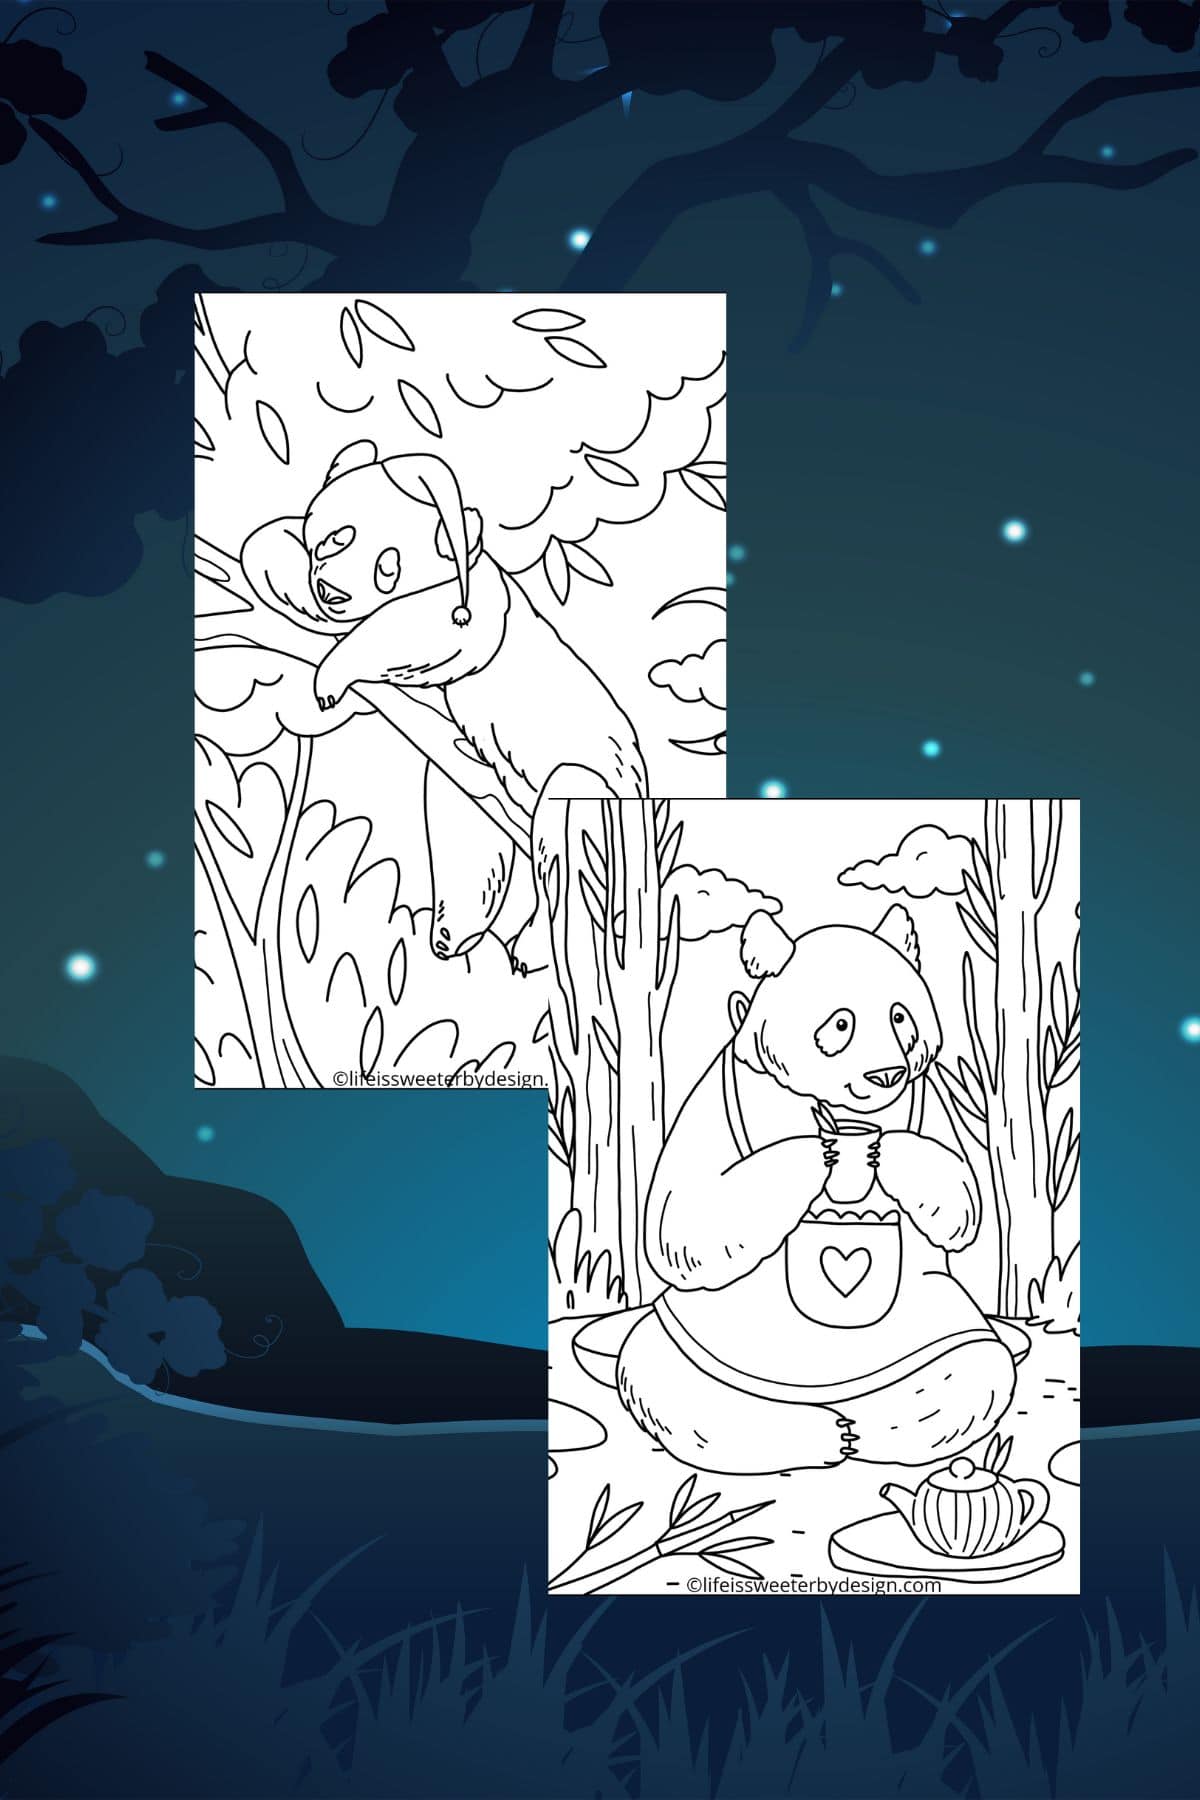 Panda coloring pages free to print